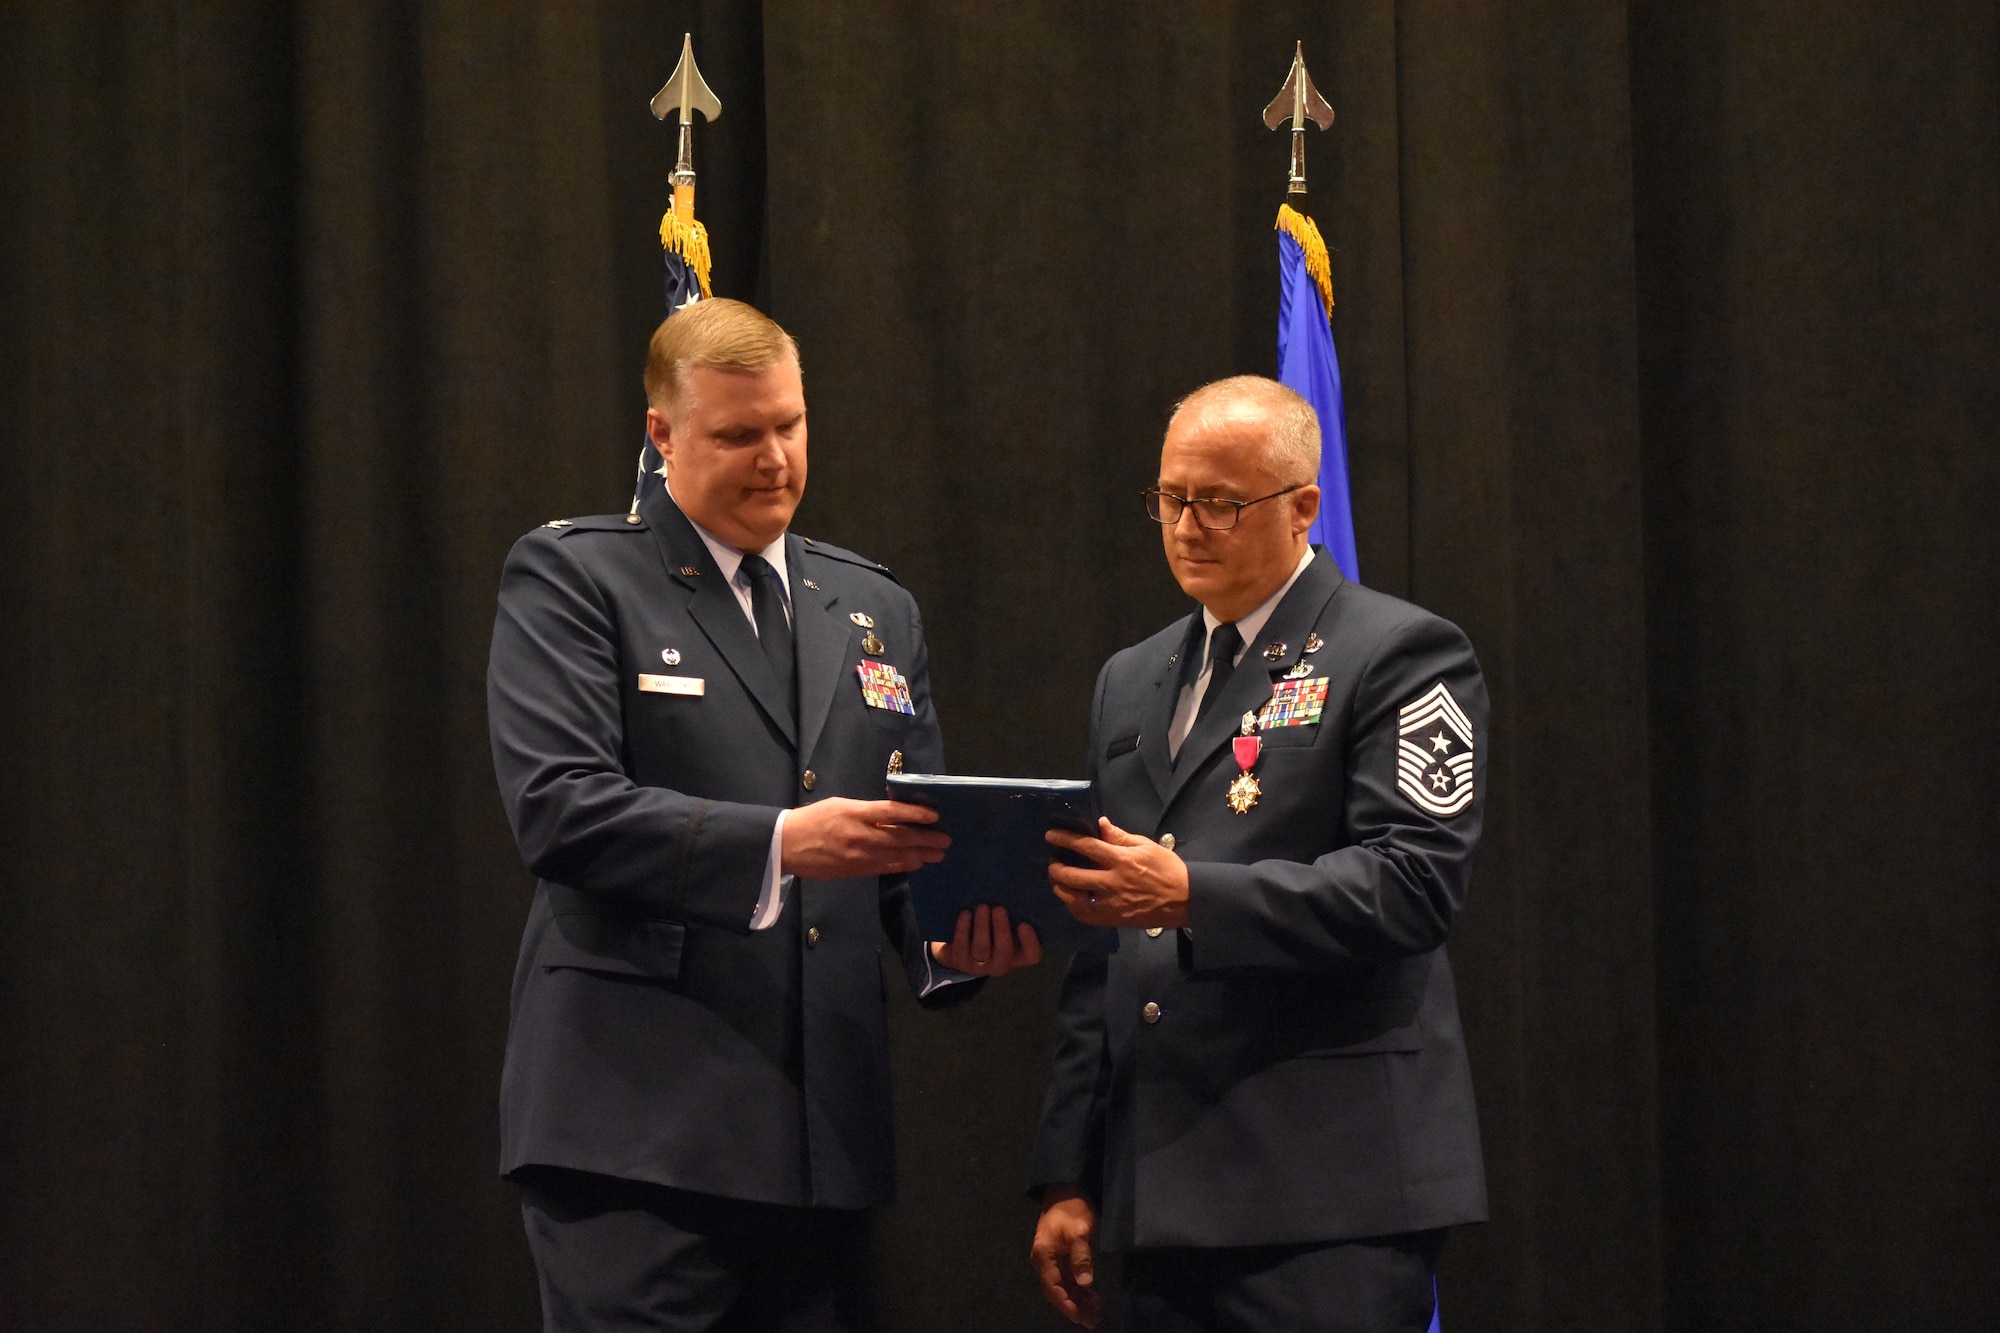 Col. Philip Warlick, left, 655th Intelligence, Surveillance and Reconnaissance Wing (ISRW) Commander, presents Chief Master Sgt. Bohdan Pywowarczuk II, 655th ISRW Command Chief, with a plaque during the chief’s retirement ceremony Sept. 9, 2023, at the National Museum of the U.S. Air Force, Dayton, Ohio. (U.S. Air Force photo/Maj. Wilson Wise)